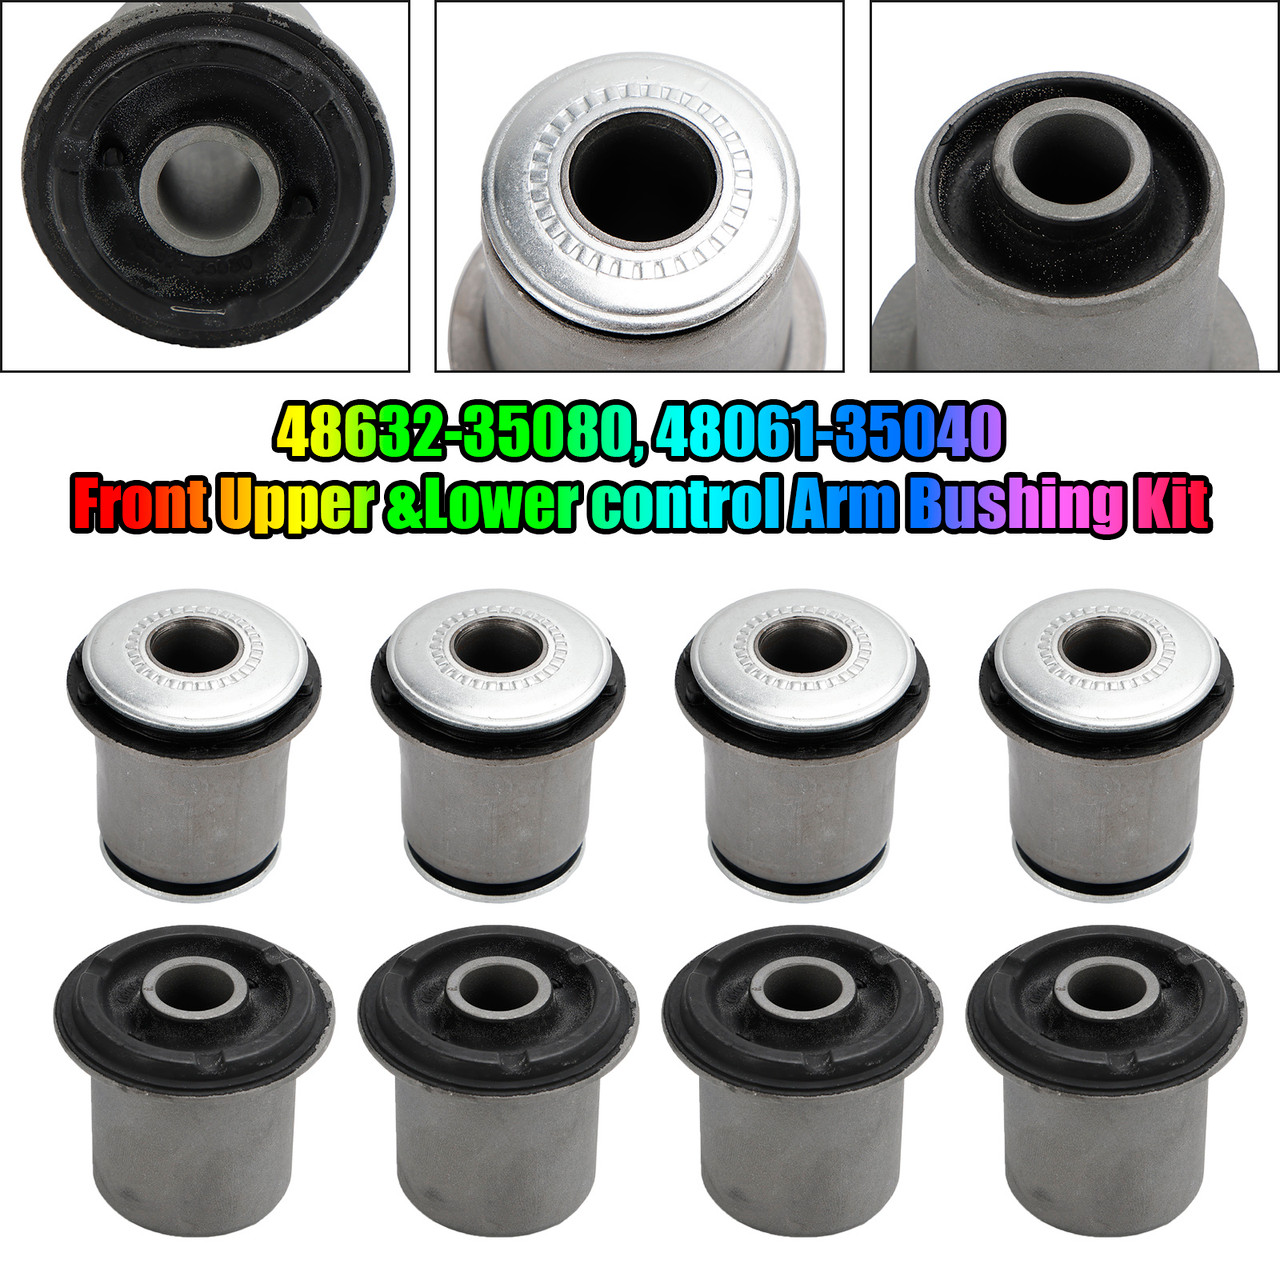 Front Upper & Lower control Arm Bushing Kit For Toyota Tacoma 4Runner 96-02